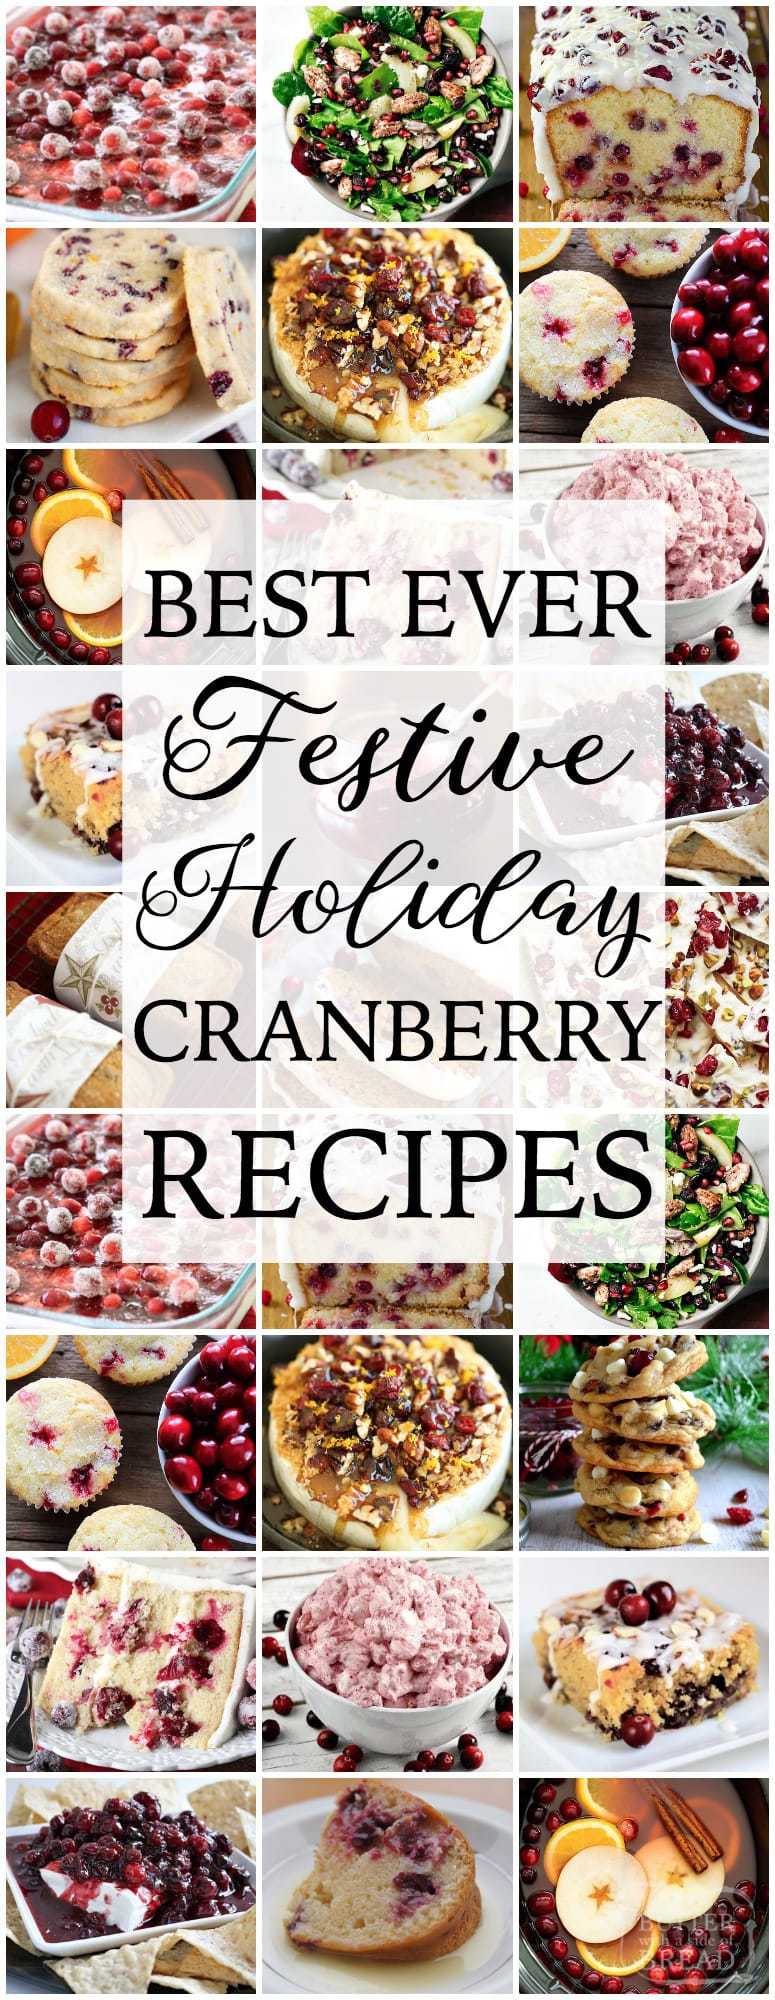 Cranberry recipes both sweet & savory, perfectly festive and delicious for the holidays. Easy to make cranberry recipes bursting with flavor. Perfectly #festive #holiday #cranberry #recipes for #Thanksgiving and #Christmas from Butter With A Side of Bread